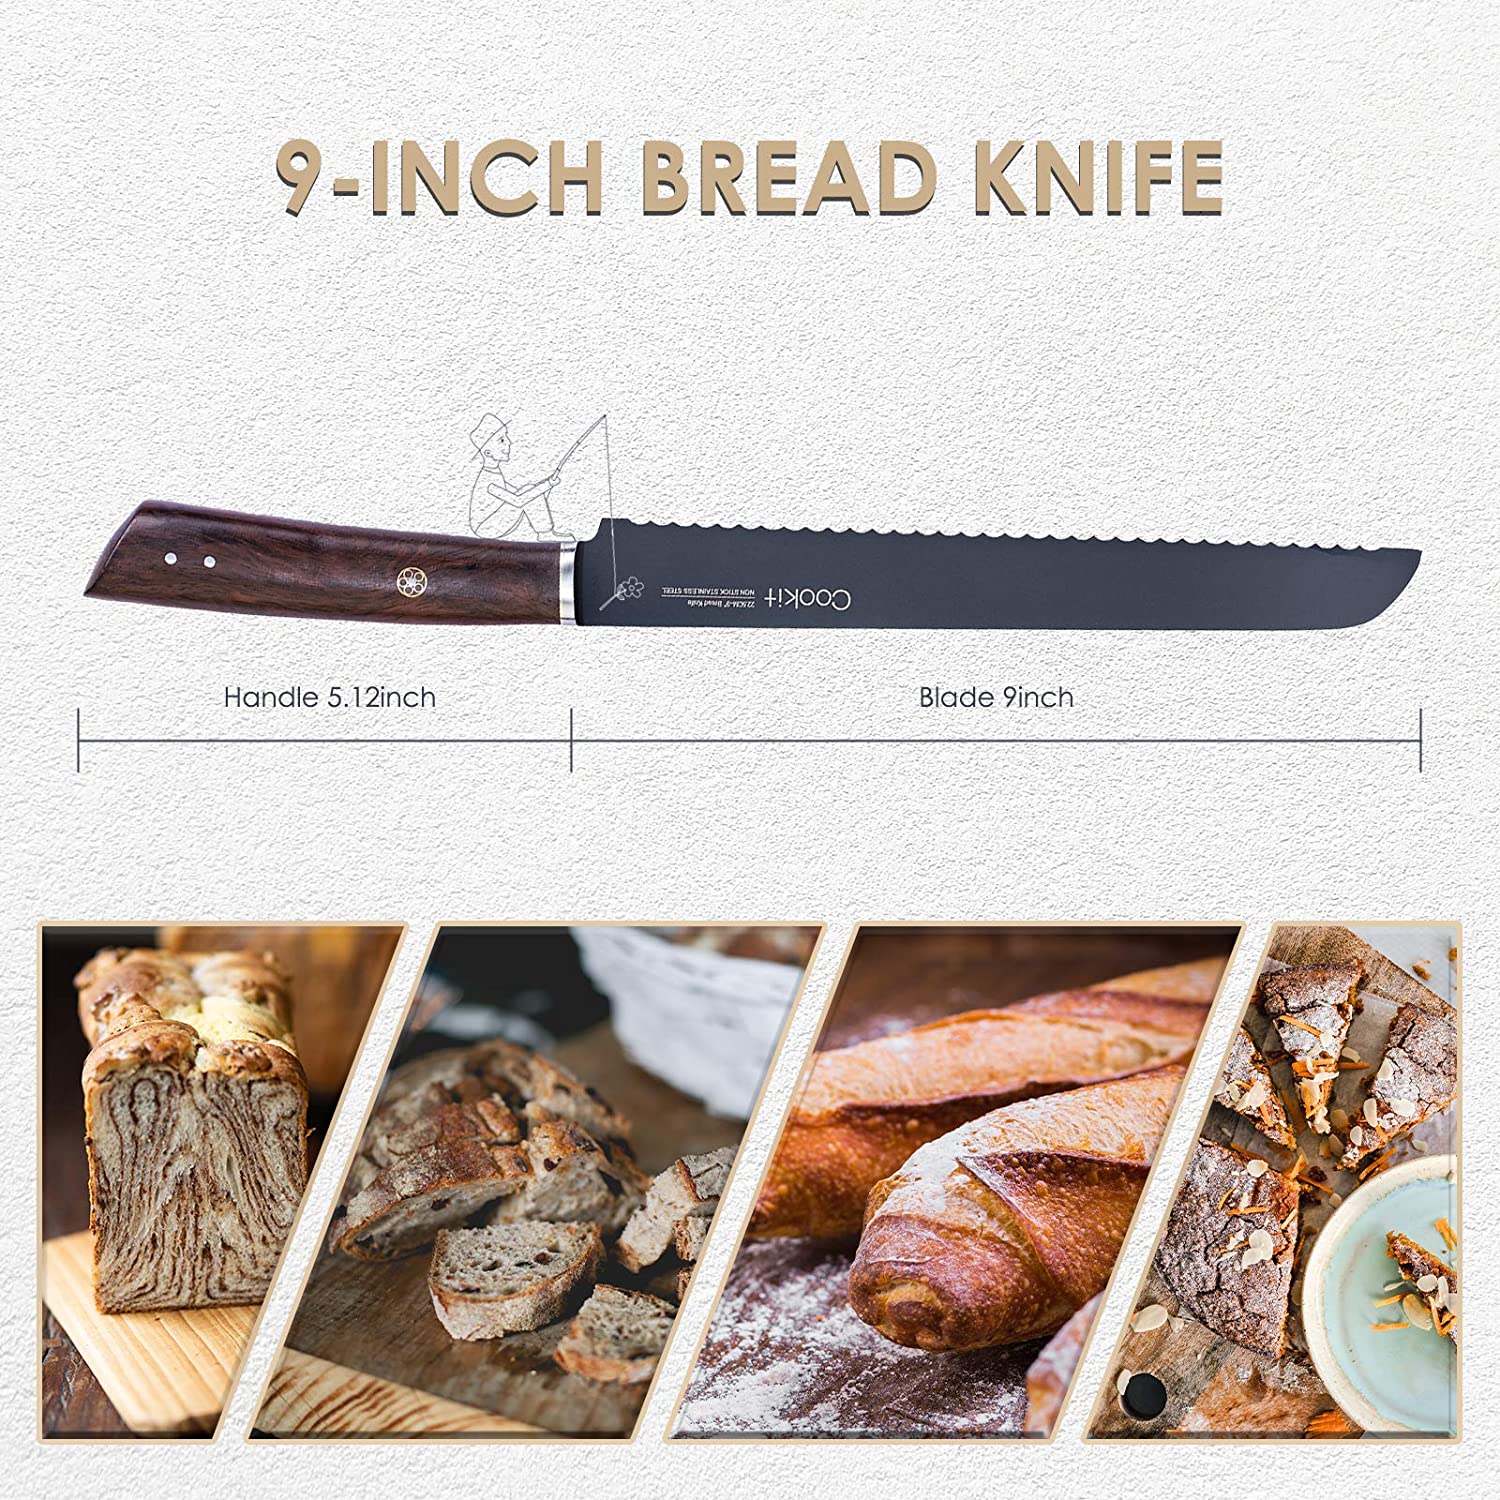 9 Inches Bread Knife Serrated Edge High Carbon Stainless Steel Forged Cutter for Homemade Crusty Bread Amazon Platform Banned